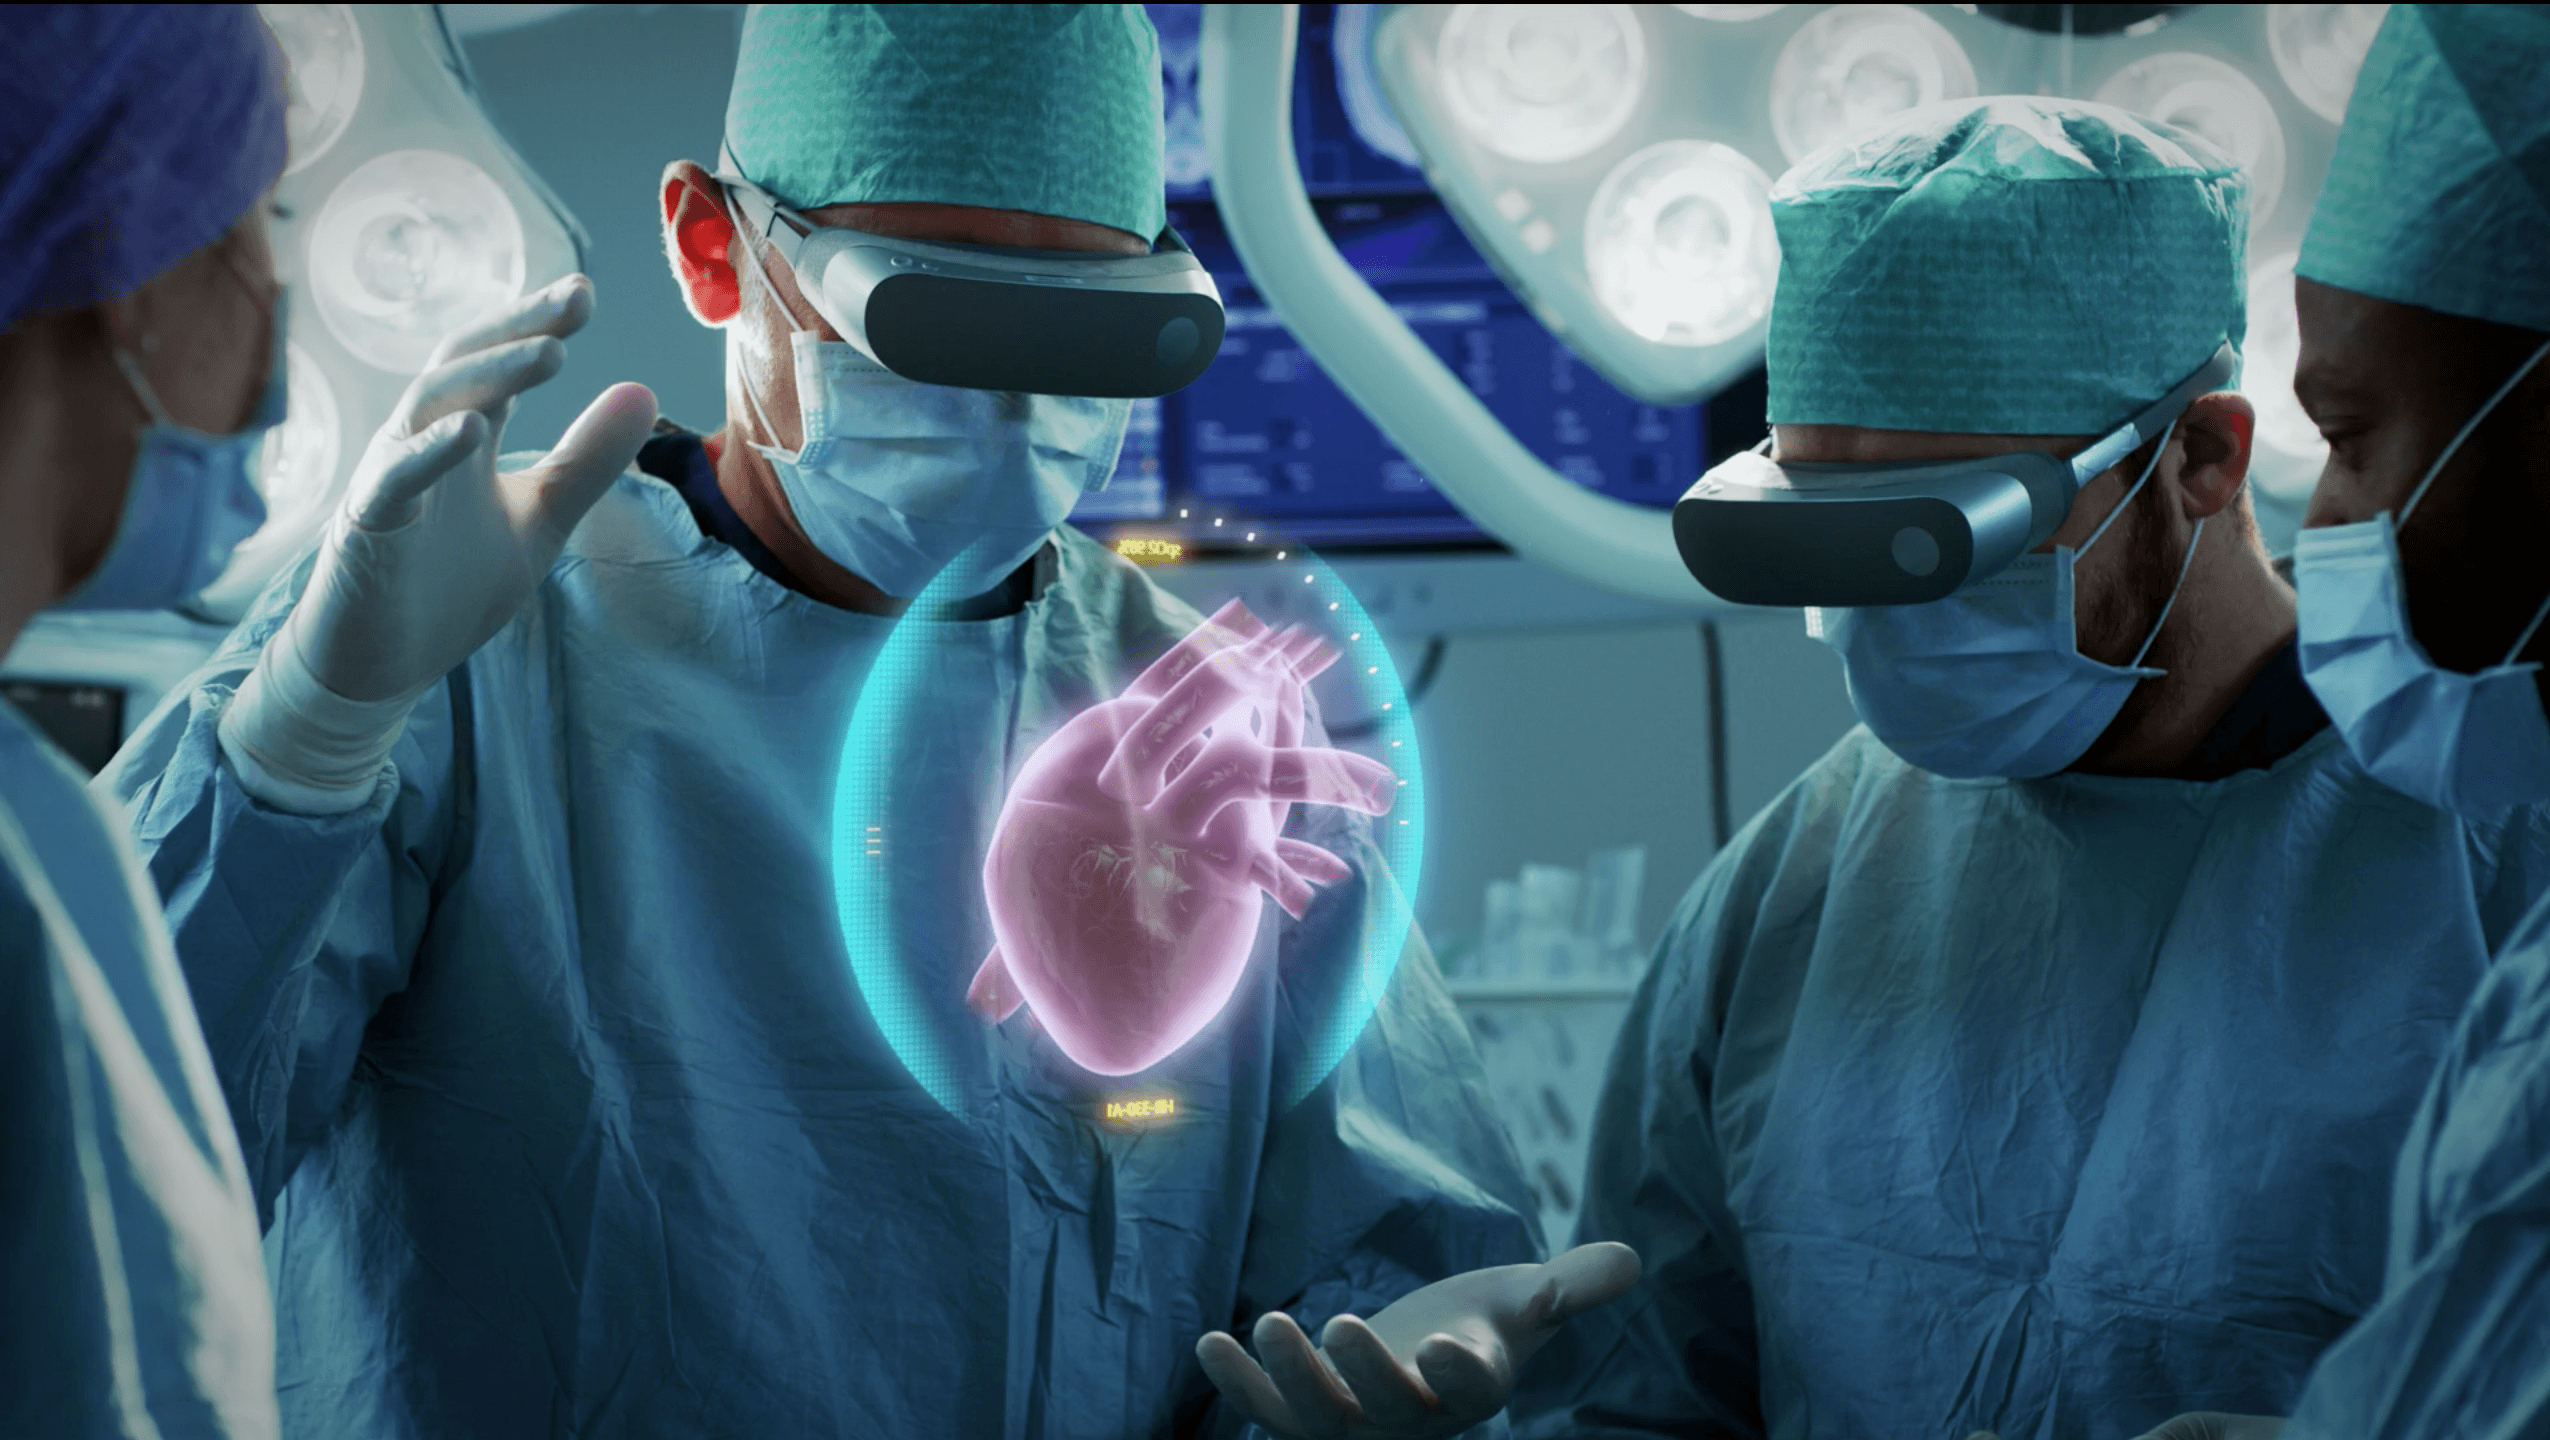 1. Title Advancing Healthcare through Mixed Reality